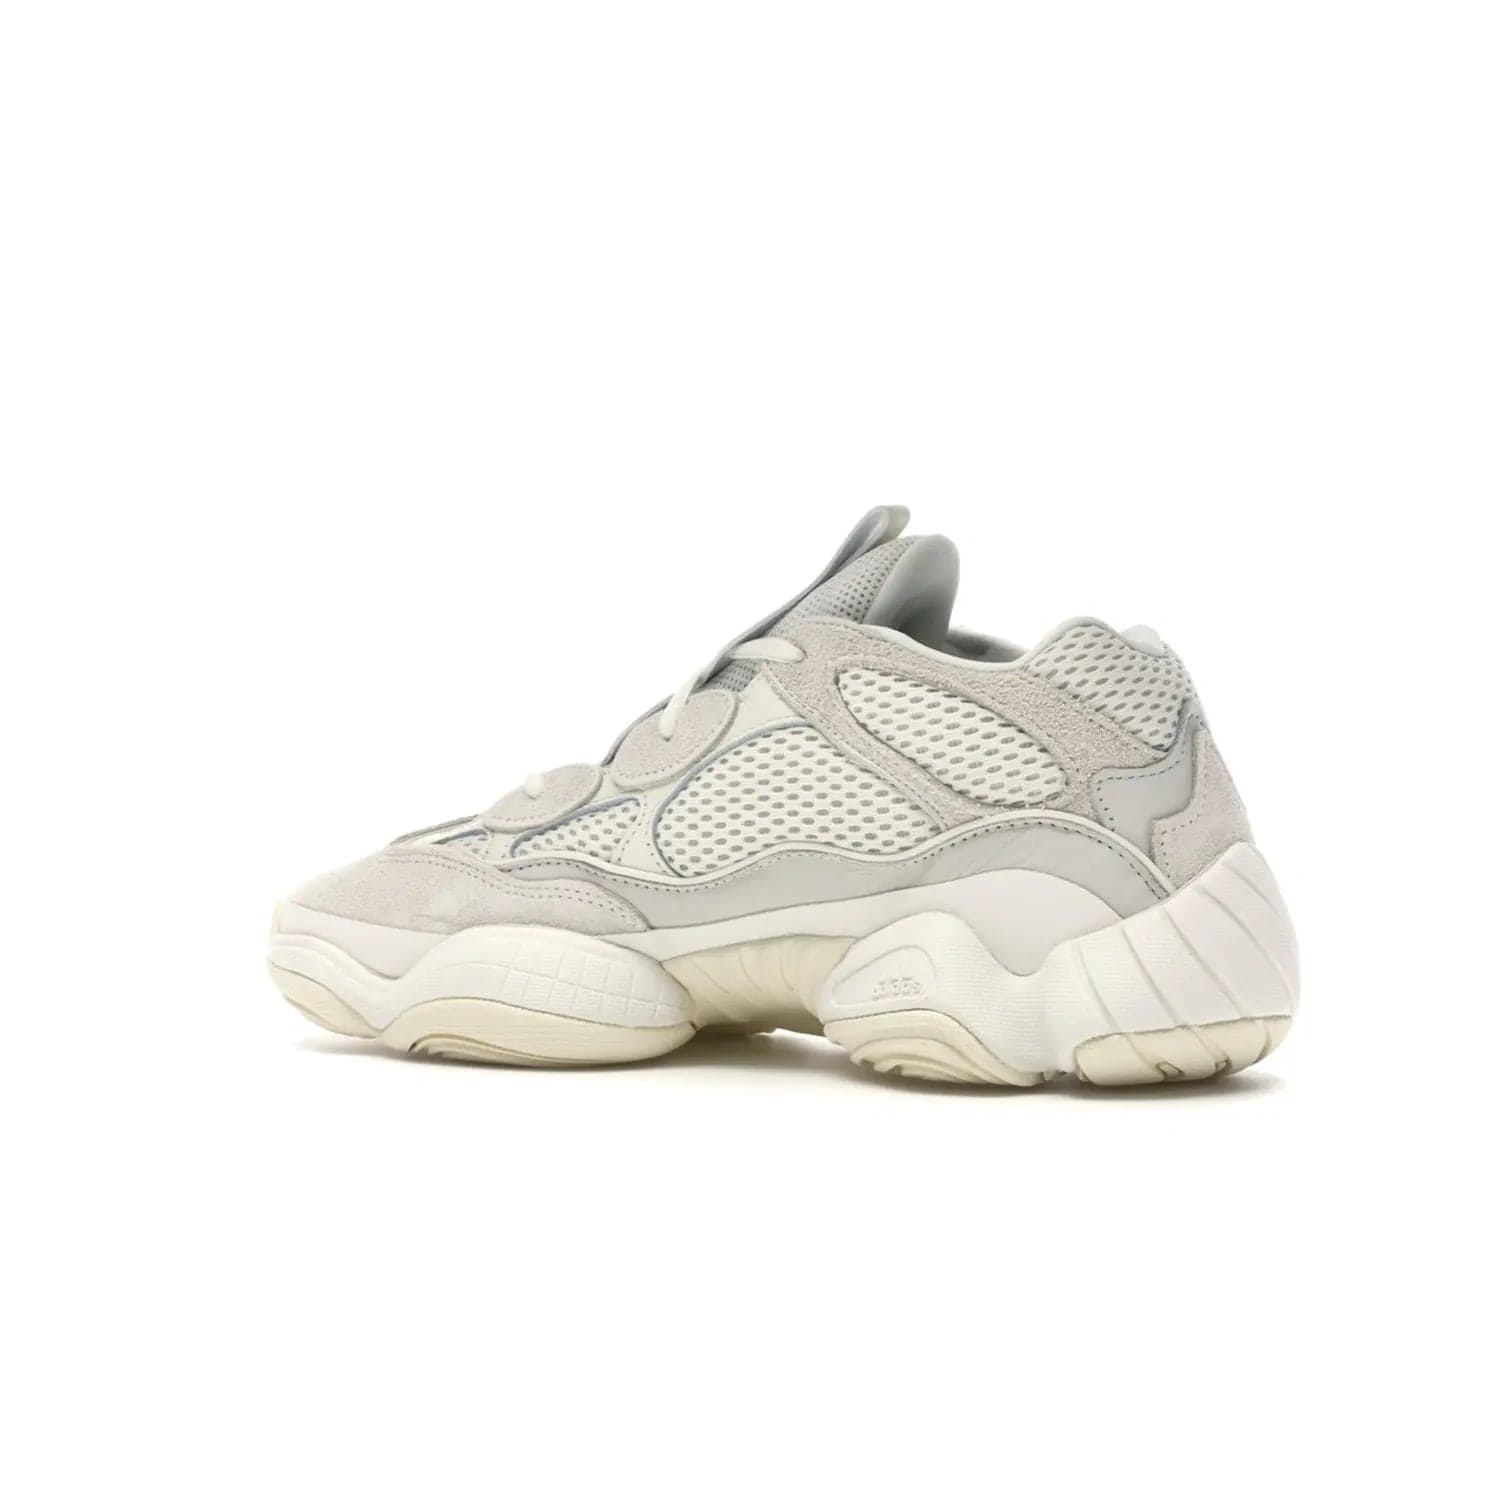 adidas Yeezy 500 Bone White - Image 22 - Only at www.BallersClubKickz.com - Classic look perfect for any sneaker collection. The adidas Yeezy 500 "Bone White" blends a white mesh upper with suede overlays & a chunky midsole inspired by the Adidas KB3. Complimented by a tonal-cream outsole, this timeless style is a must-have.